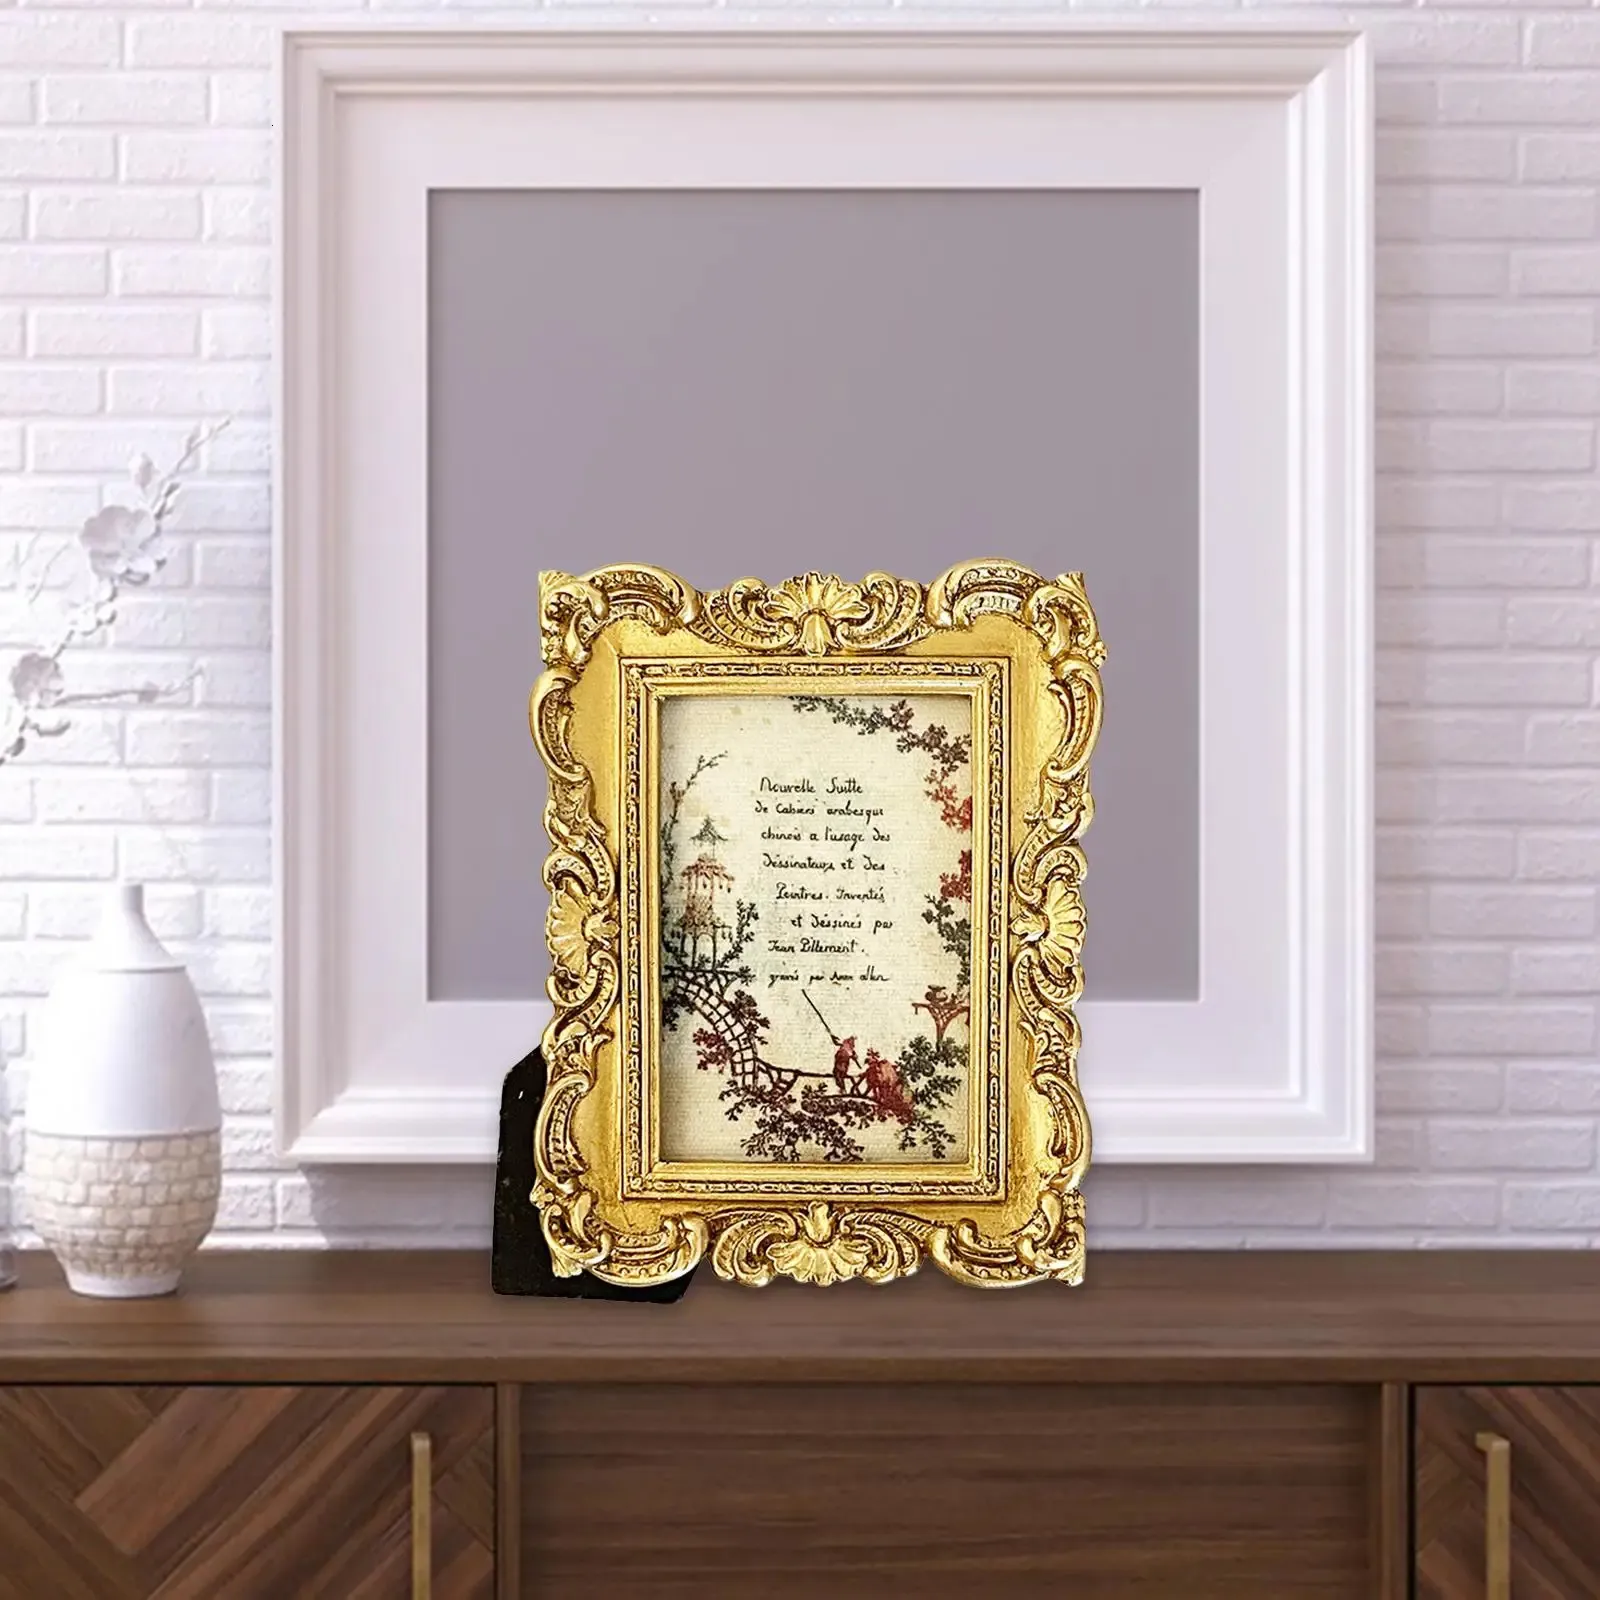 Antique Photo Frame Decorative Embossed Elegant French Tabletop Wall Hanging for Home Decoration Bedroom Wedding Gift Ideas